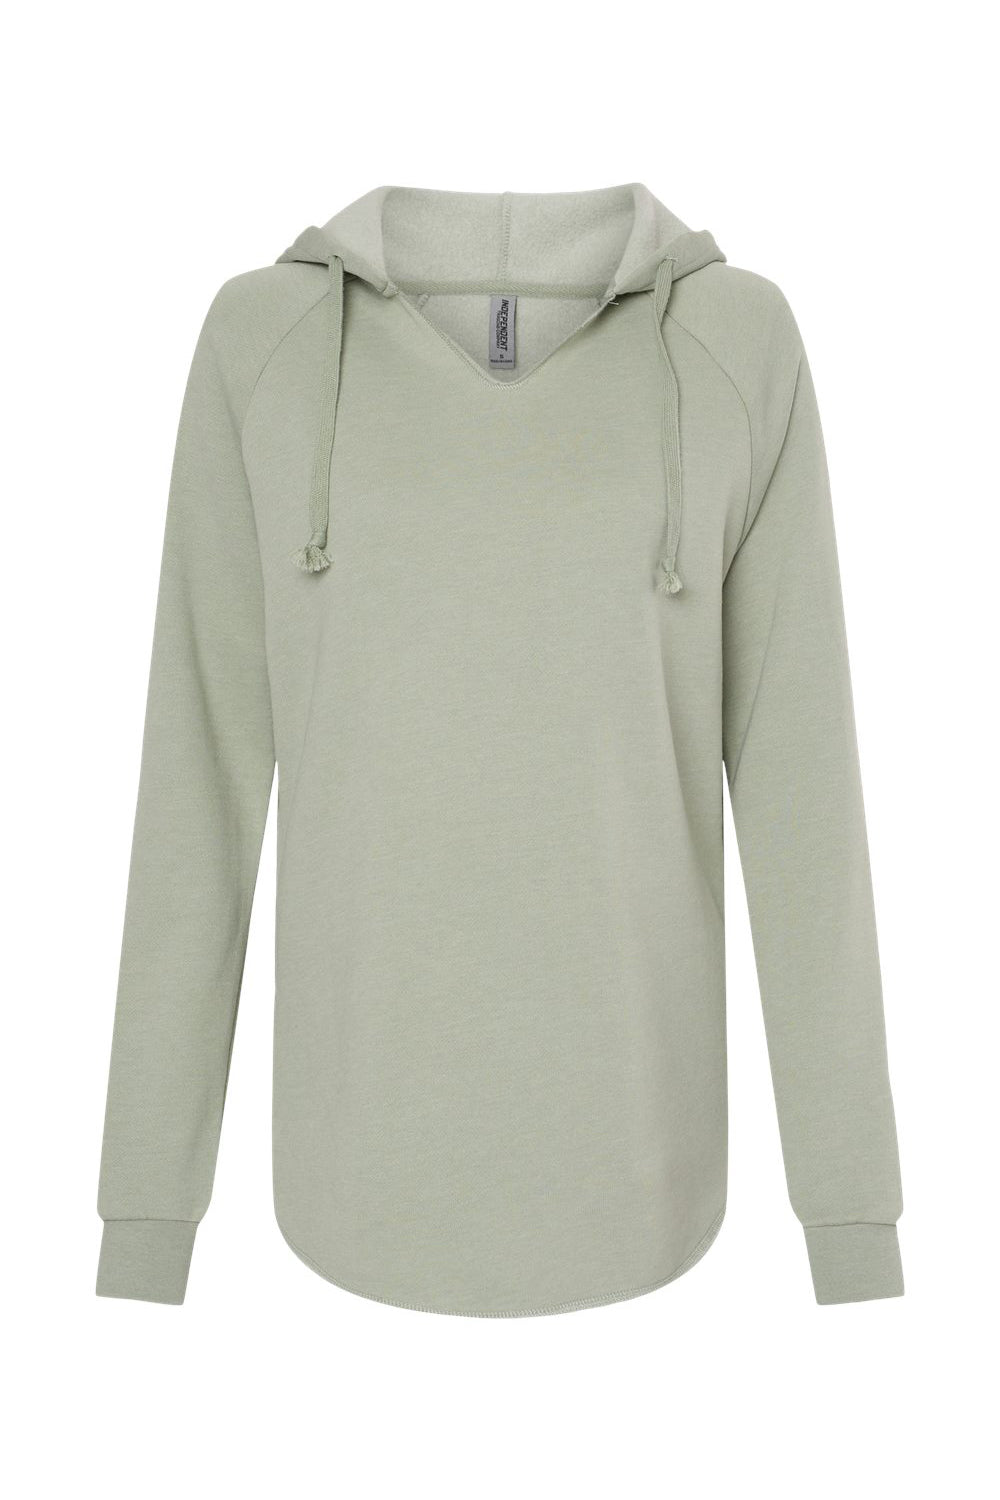 Independent Trading Co. PRM2500 Womens California Wave Wash Hooded Sweatshirt Hoodie Sage Green Flat Front